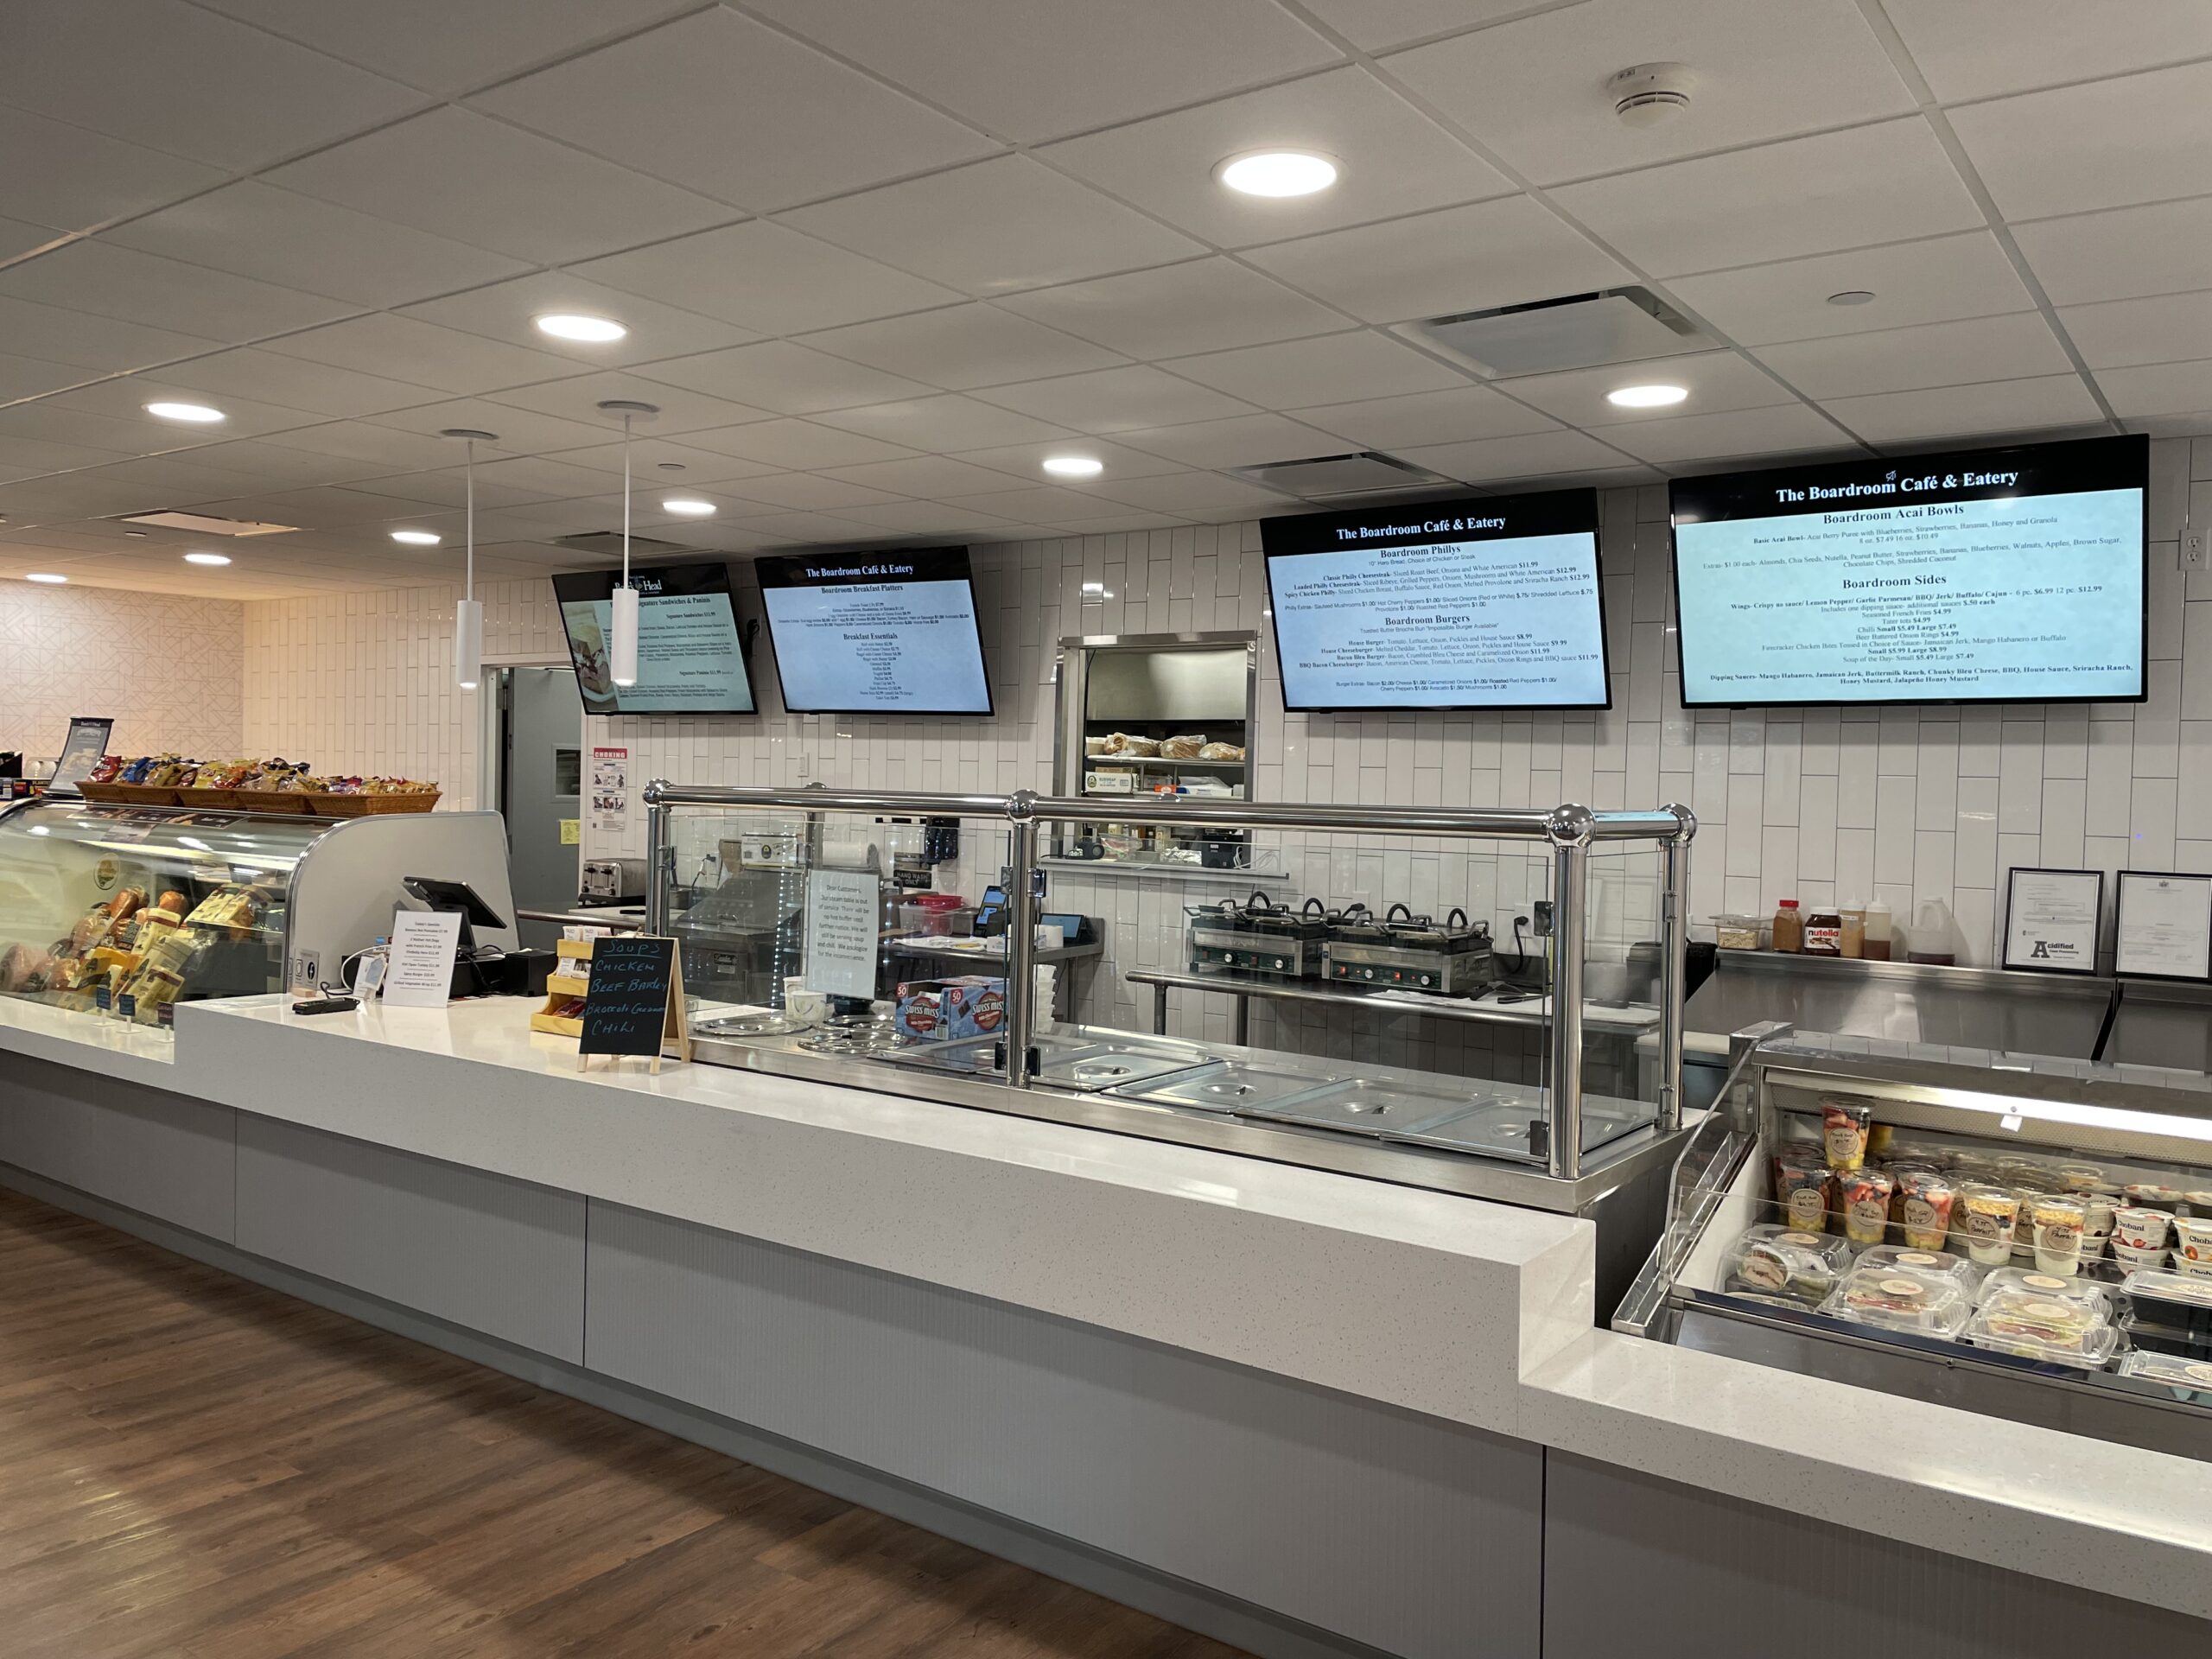 Boardroom Cafe & Eatery food counter.